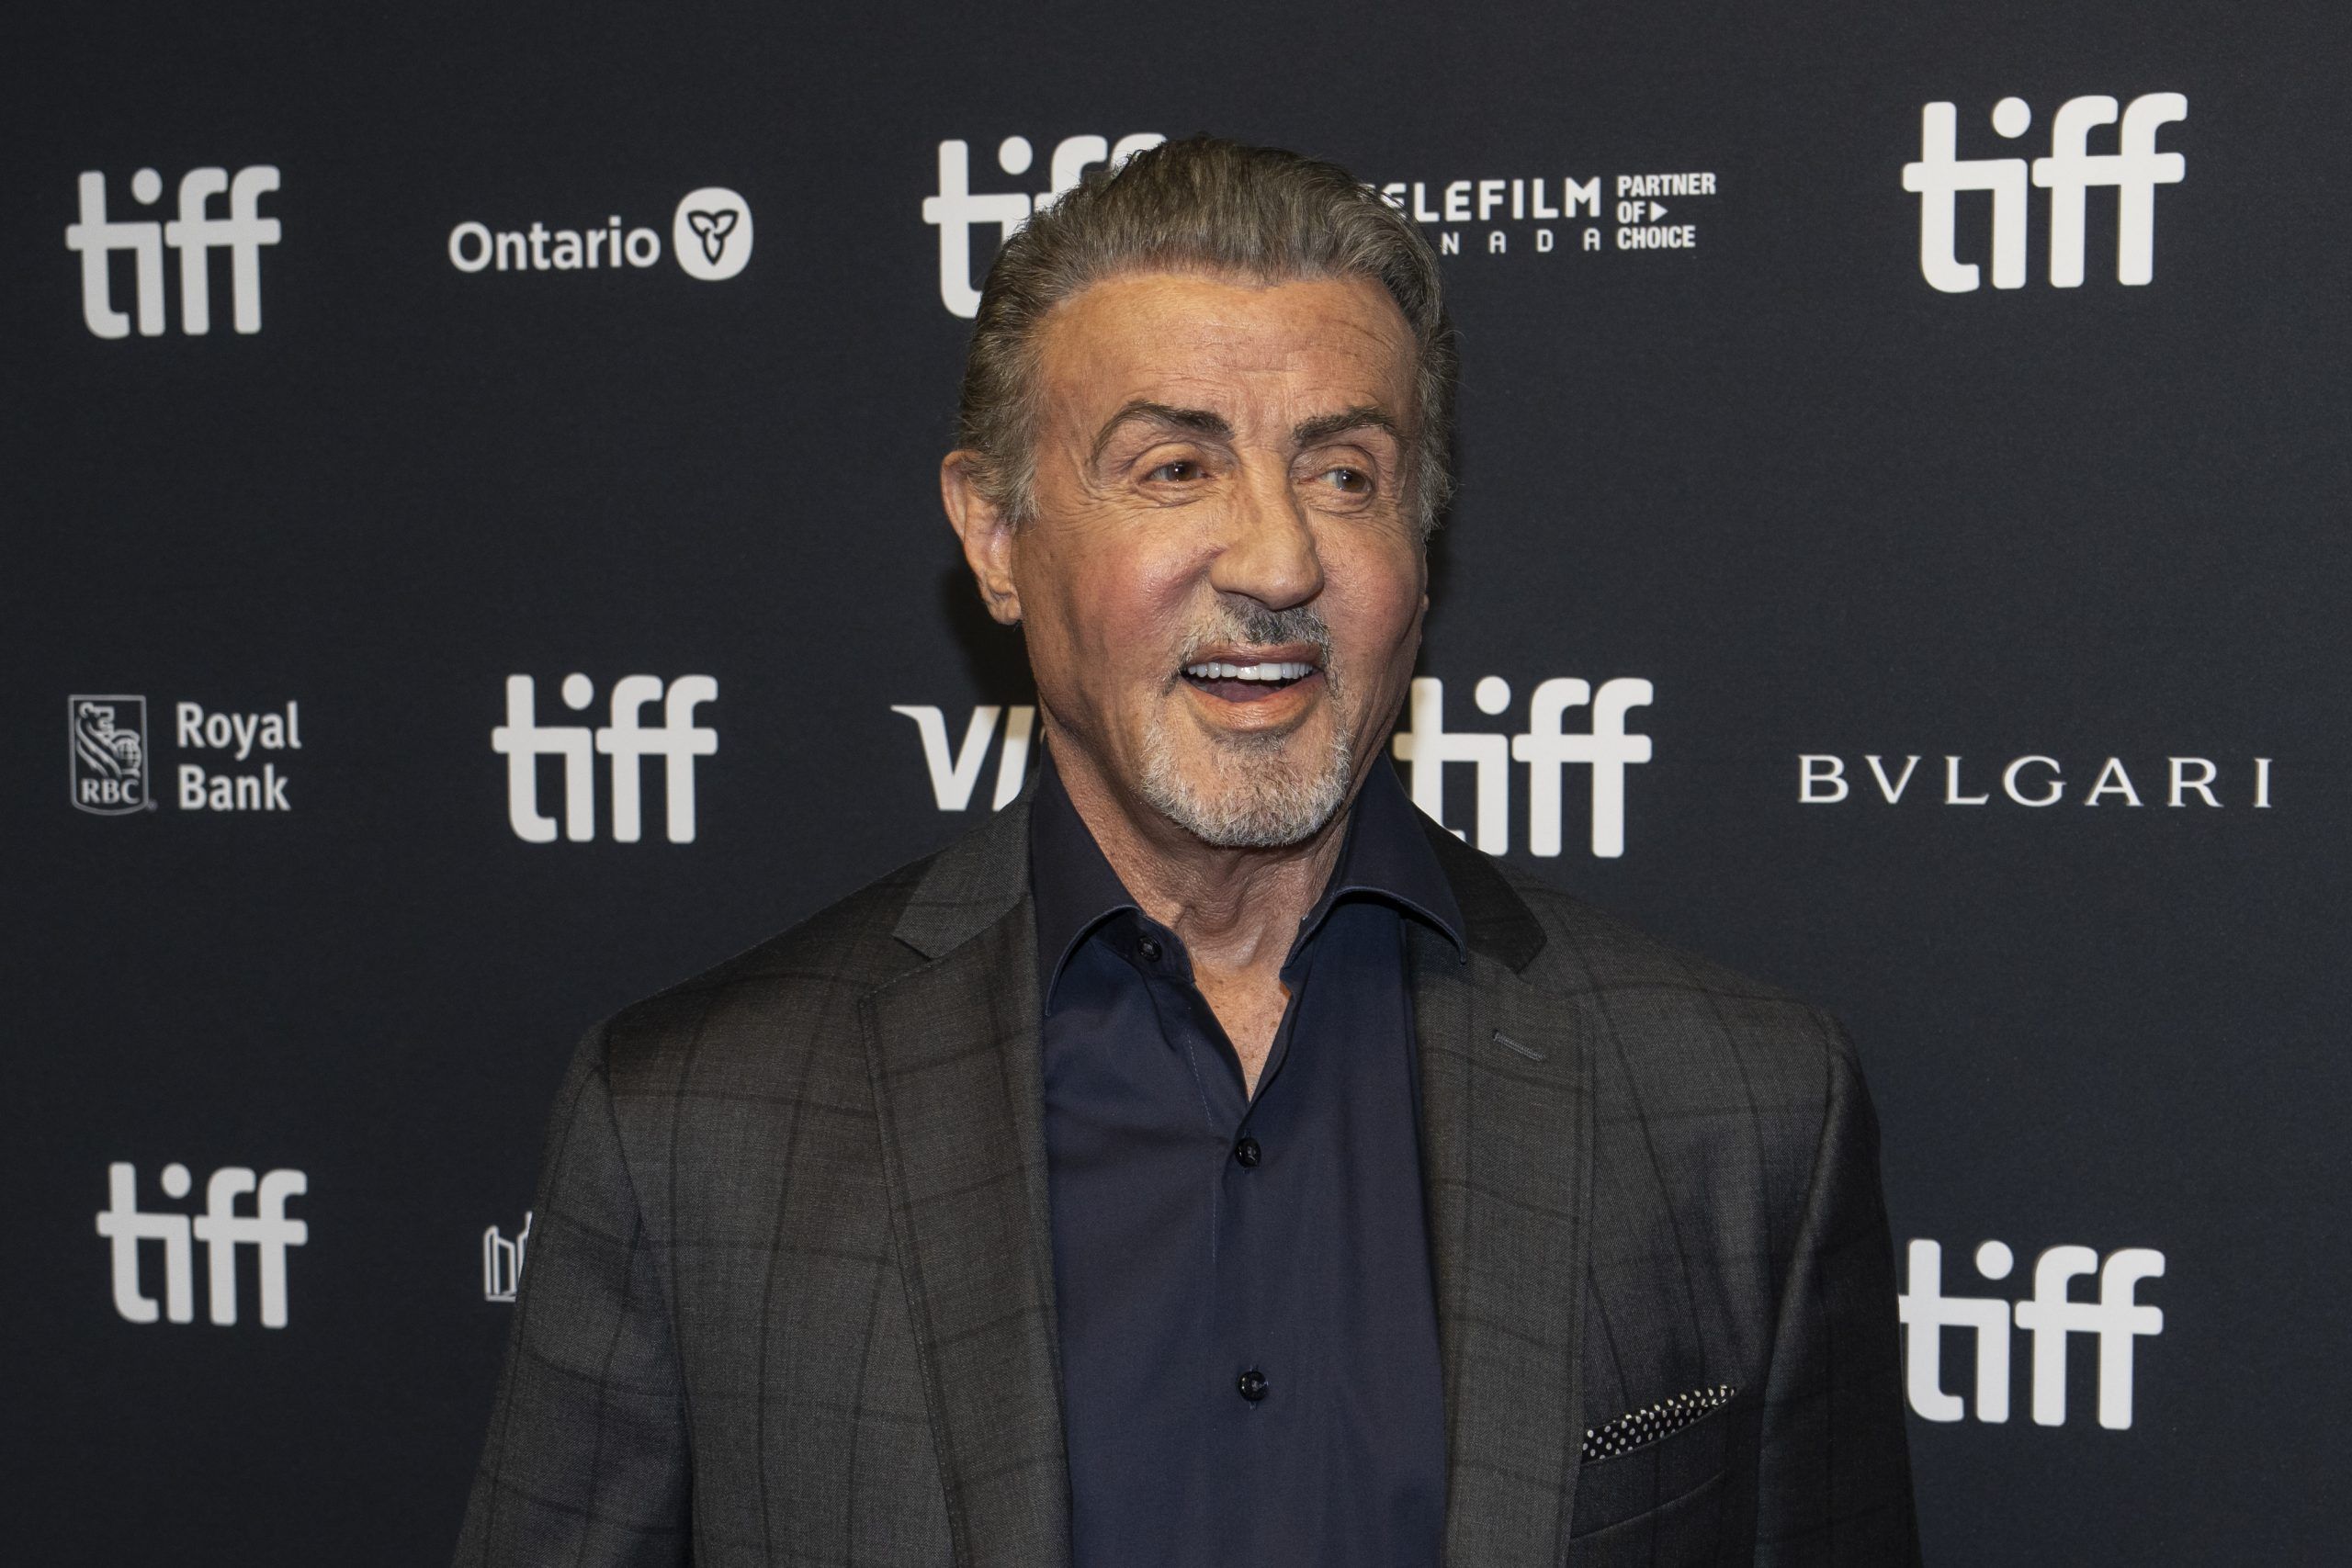 In Toronto, Sylvester Stallone reflects on lengthy career and Rocky Toronto